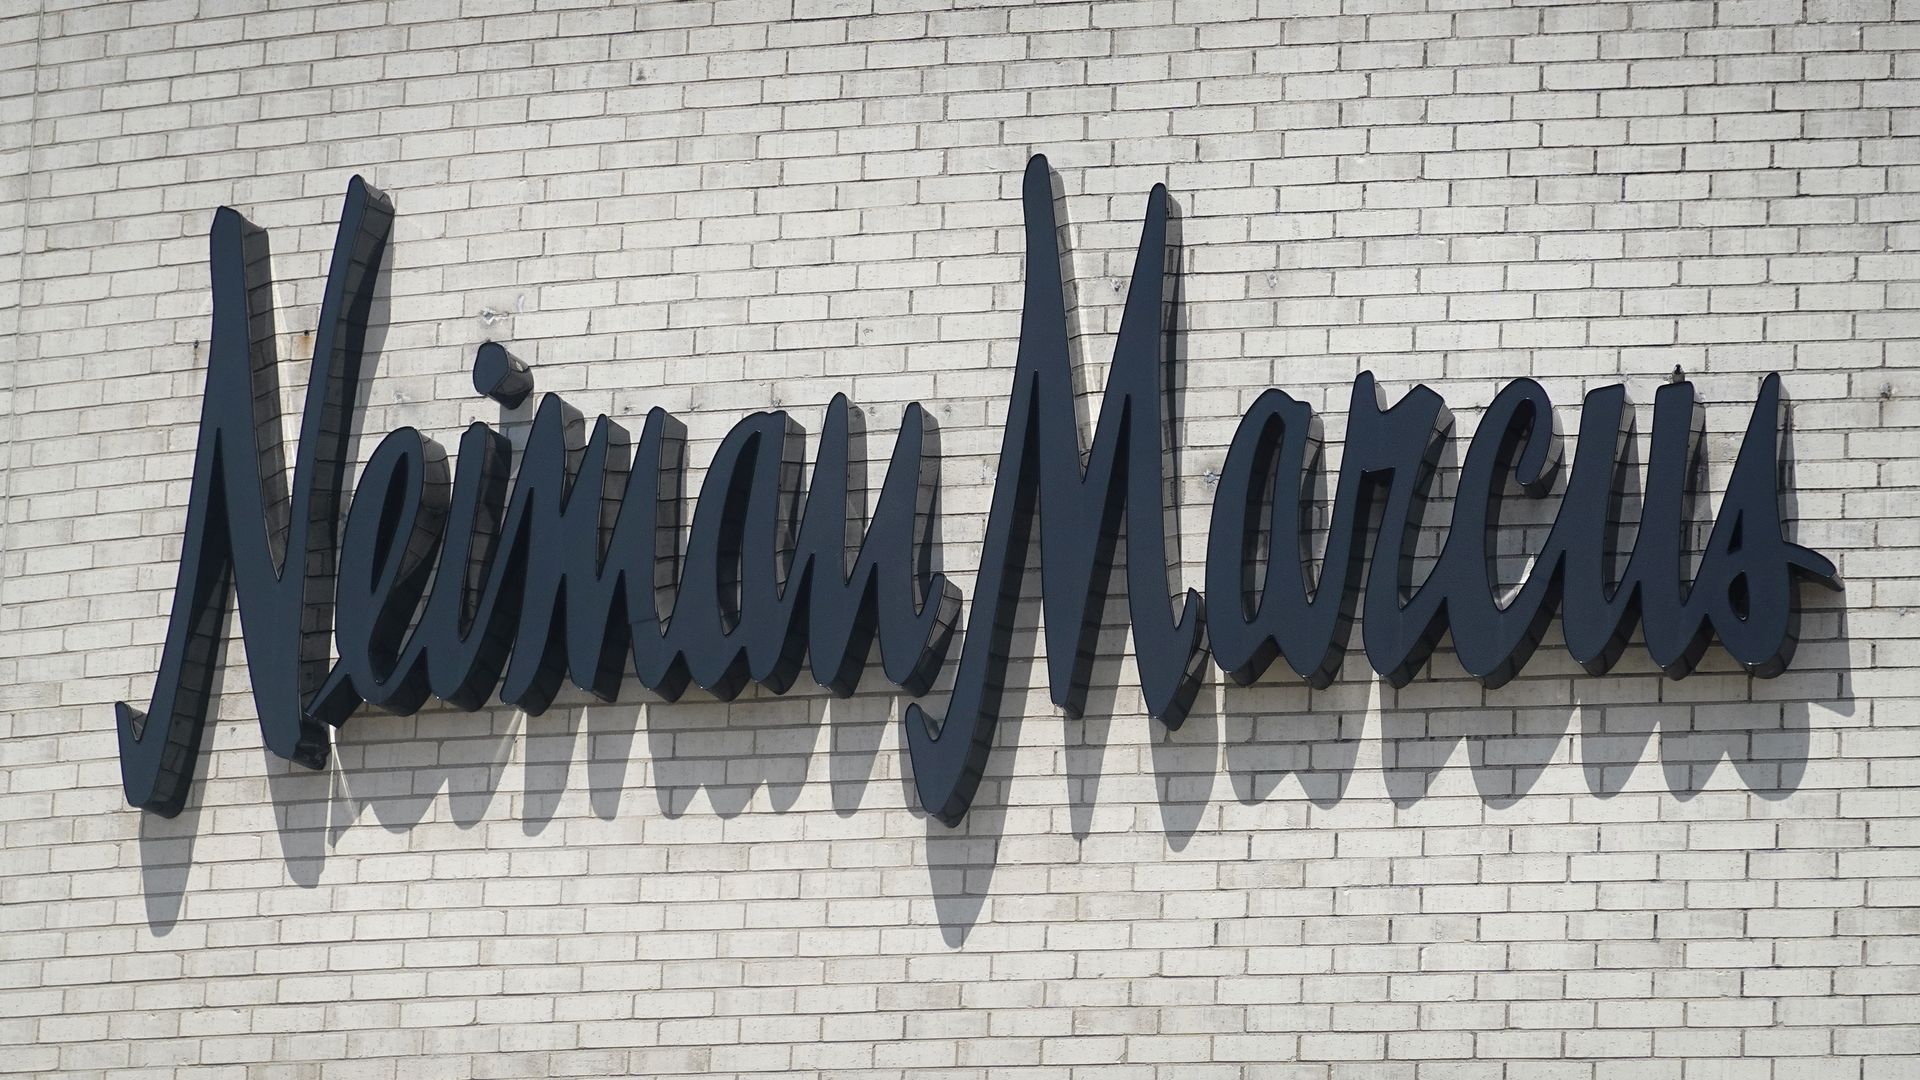 Neiman Marcus holds tight to top standing in luxury retailing